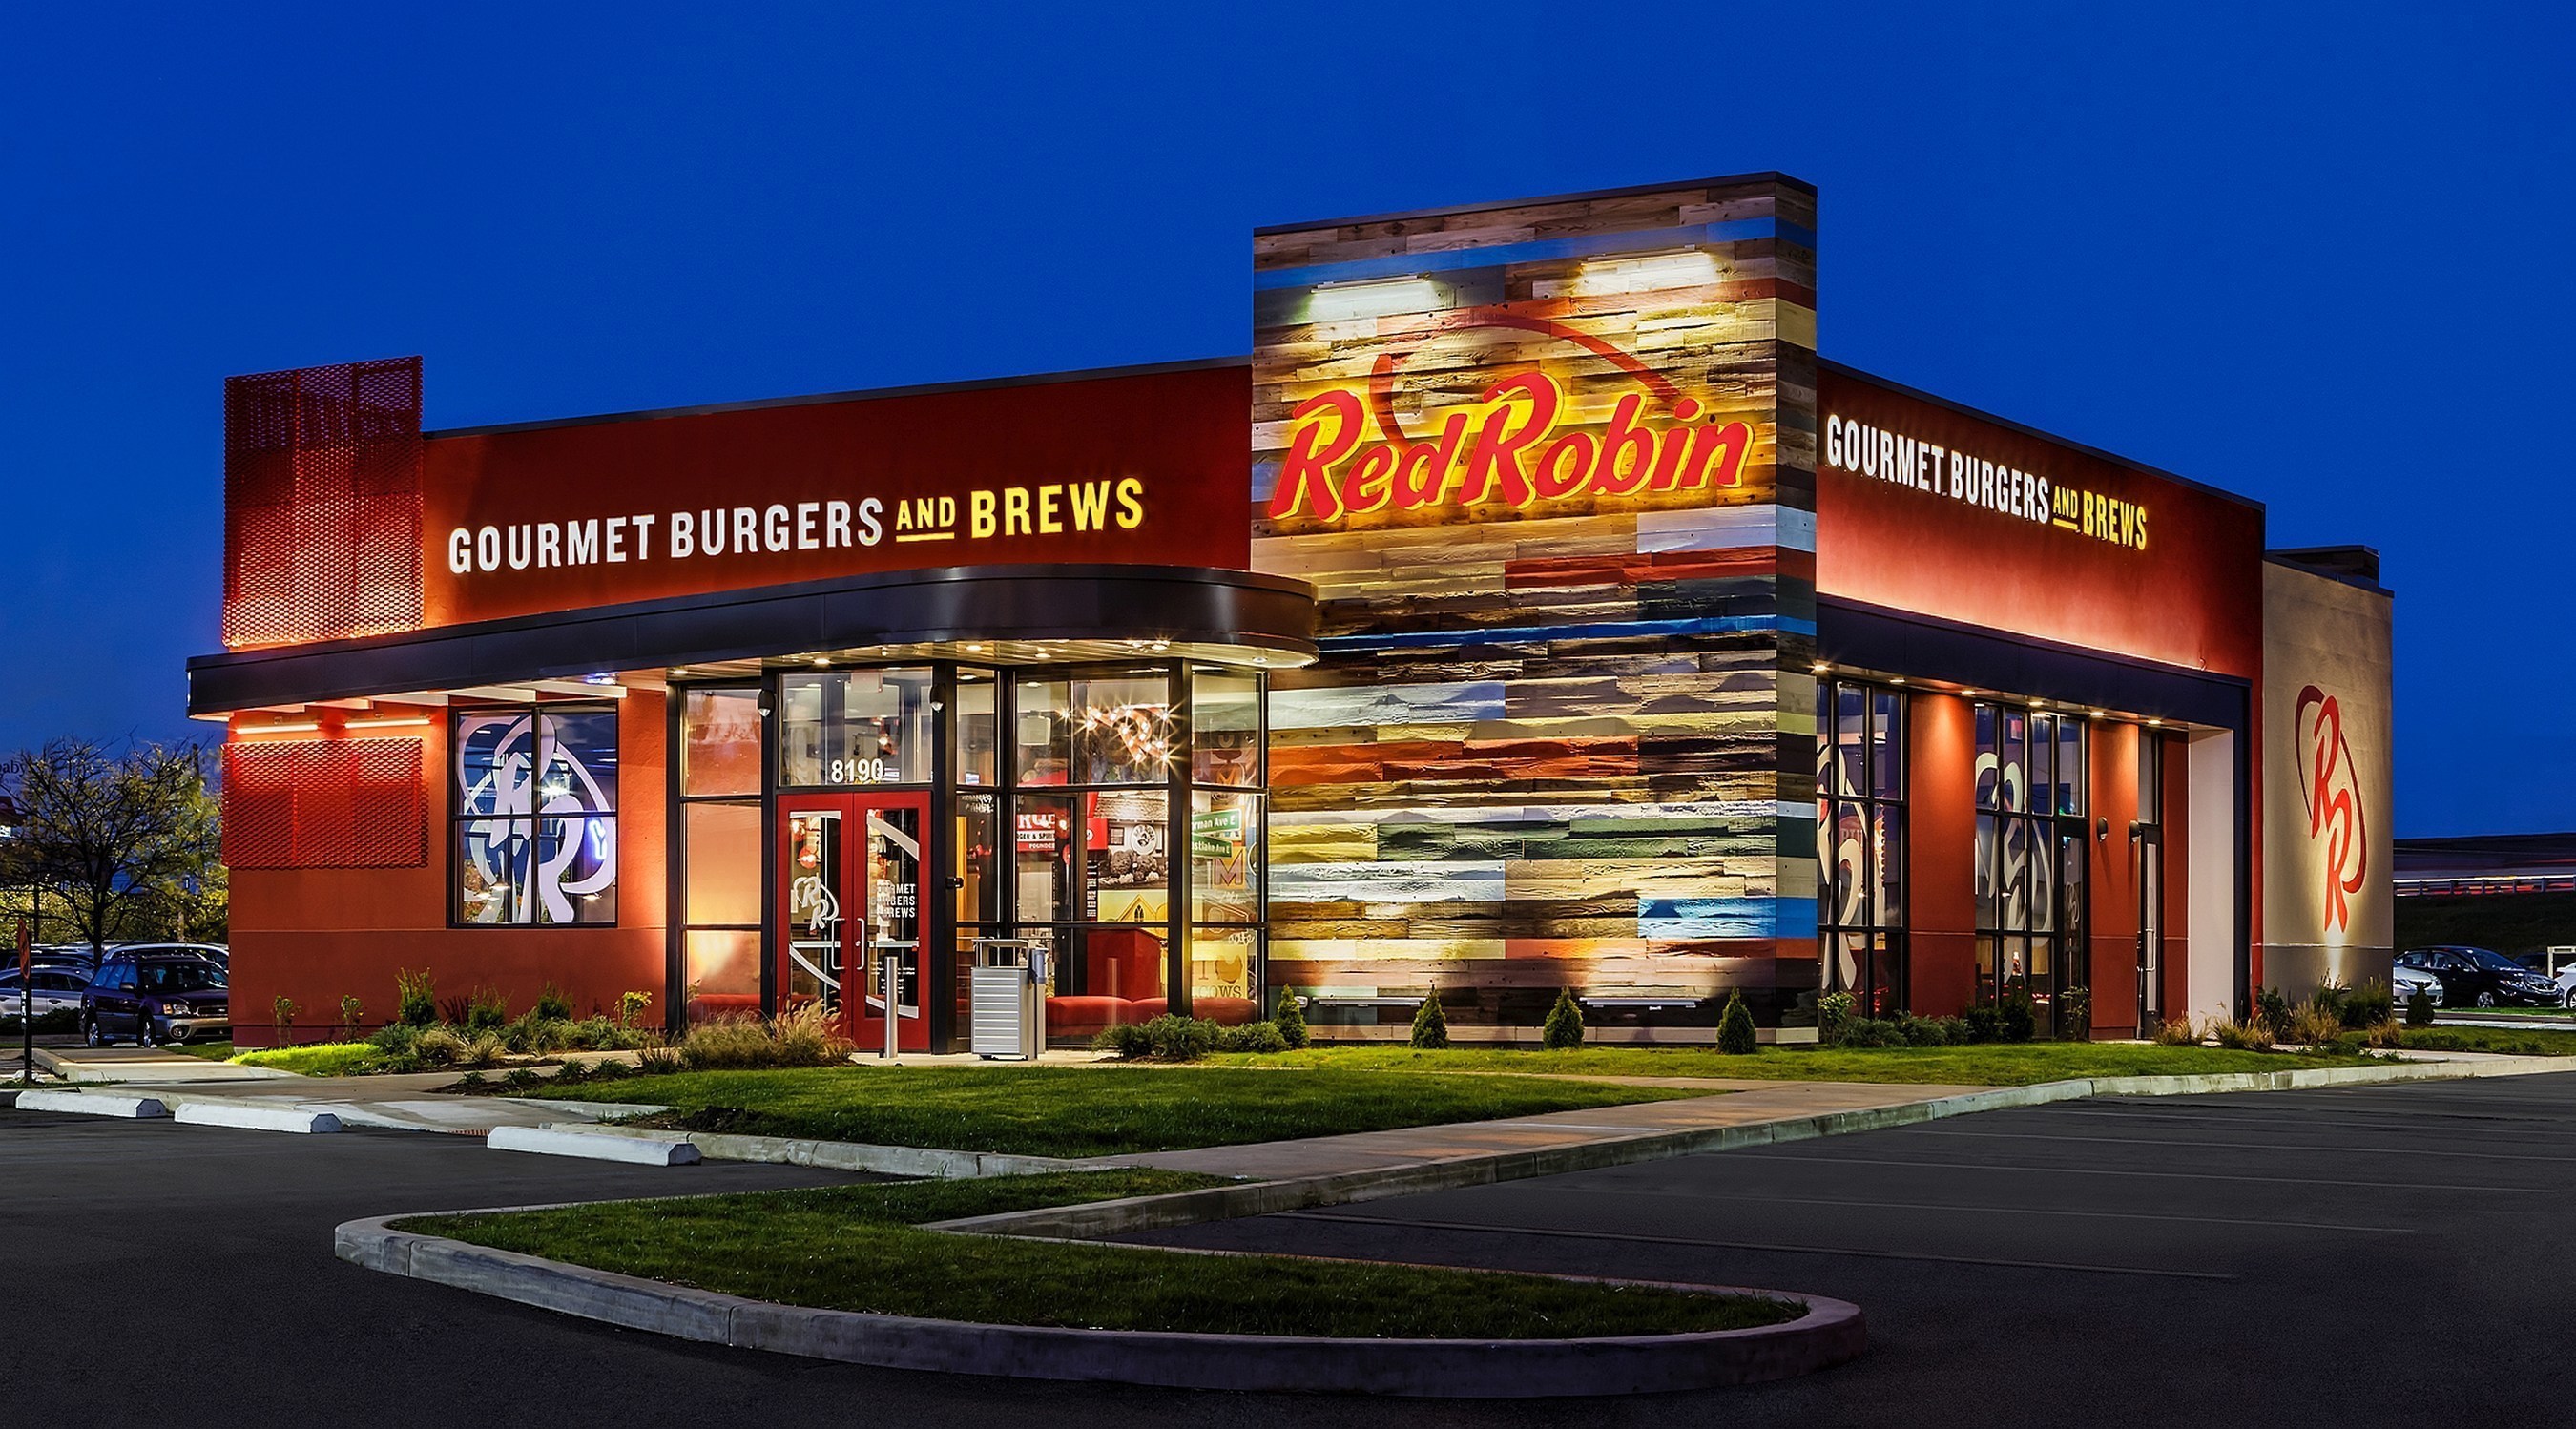 Red Robin Gourmet Burgers and Brews restaurant exterior. Red Robin Gourmet Burgers and Brews is a casual dining restaurant chain famous for serving more than two dozen craveable, high-quality burgers with Bottomless Steak Fries in a fun environment welcoming to guests of all ages. (C)2015 balloggphoto.com